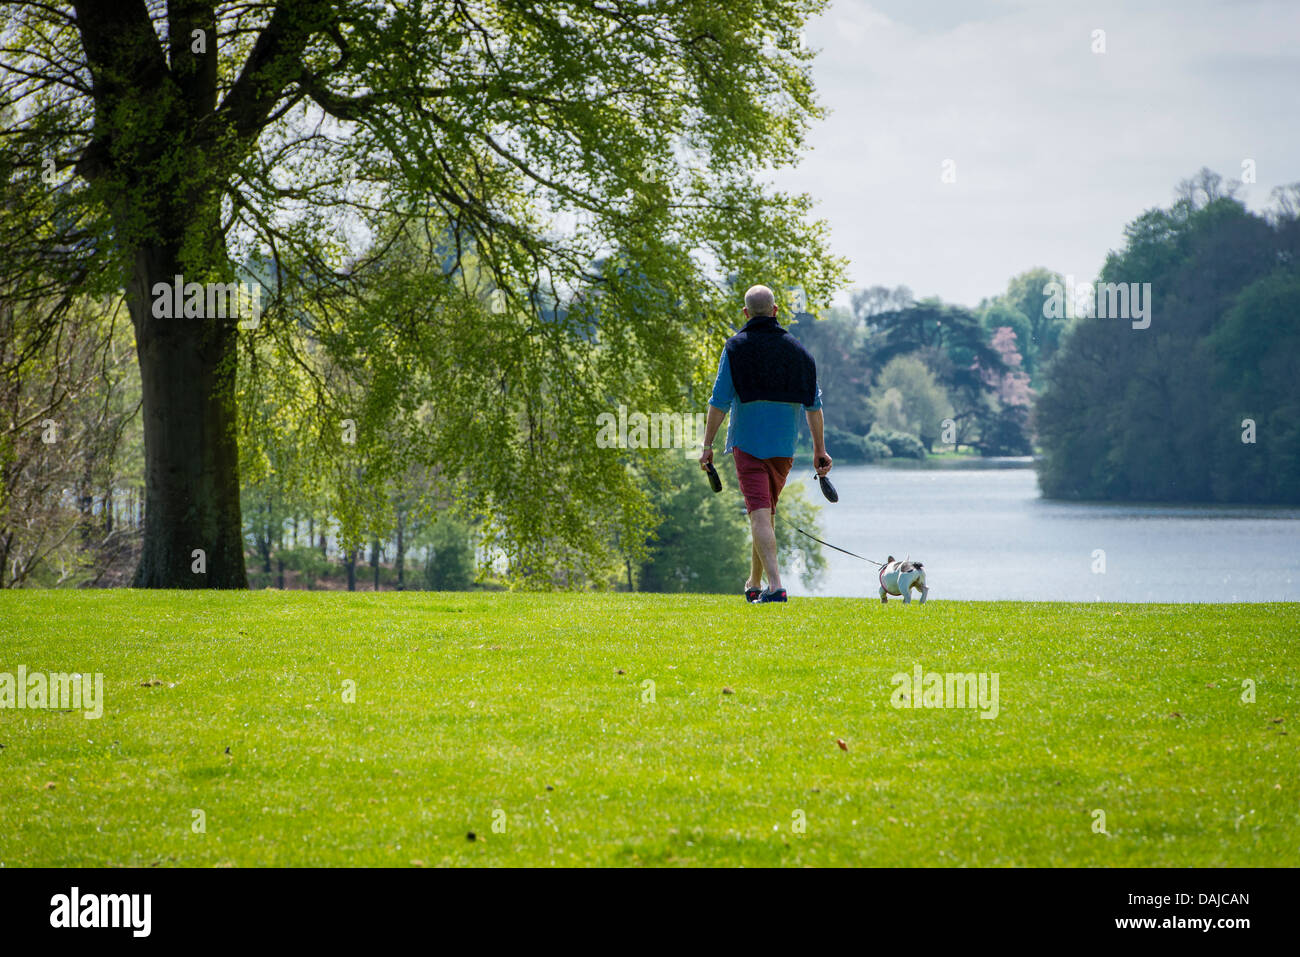 A man walking his dog in the Blenheim Palace gardens, Woodstock, Oxfordshire, United Kingdom Stock Photo